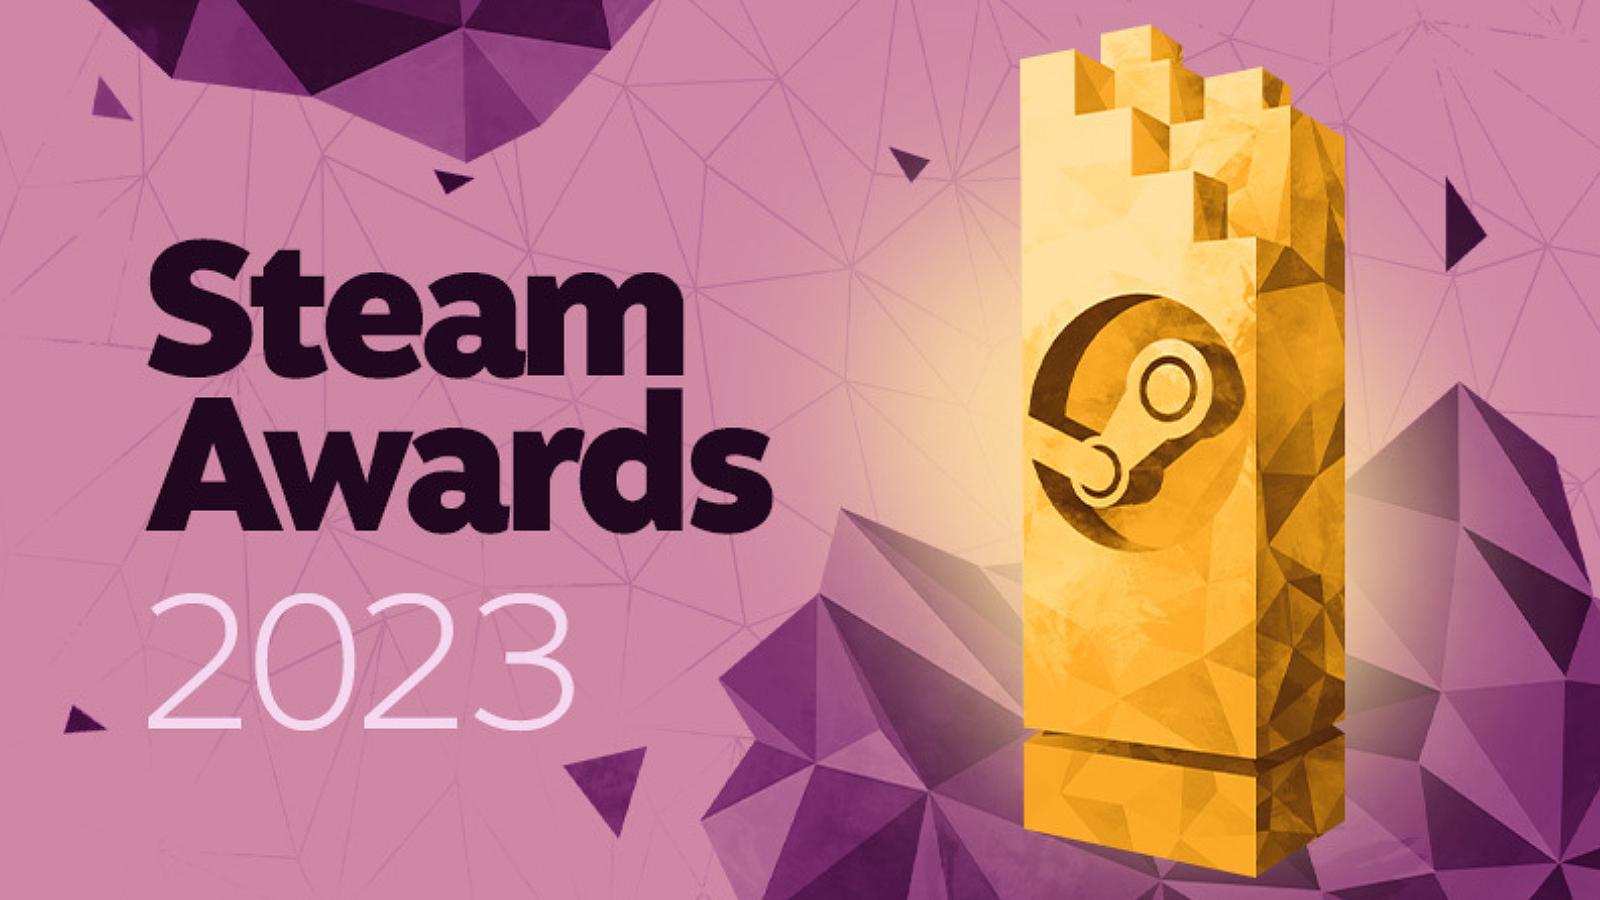 an image of Steam Awards 2023